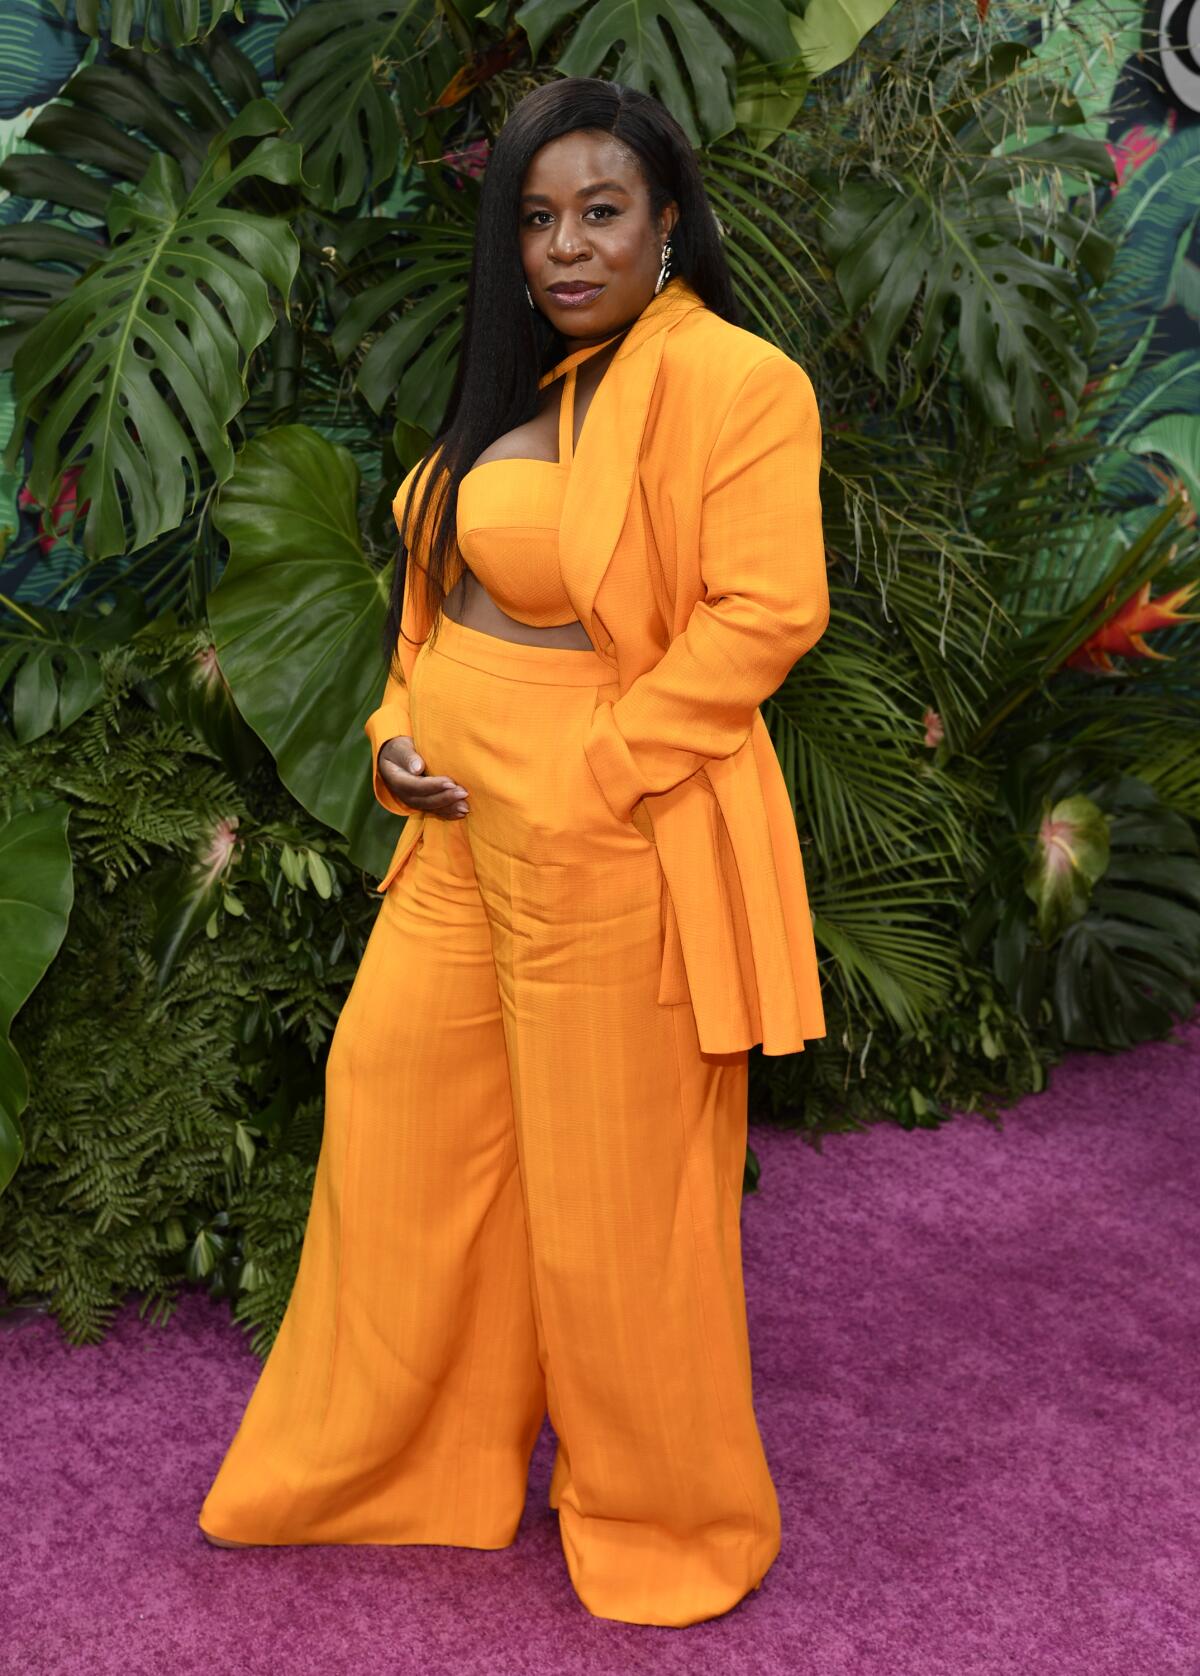 Uzo Aduba poses on a purple carpet cradling her pregnant belly while wearing an orange suit